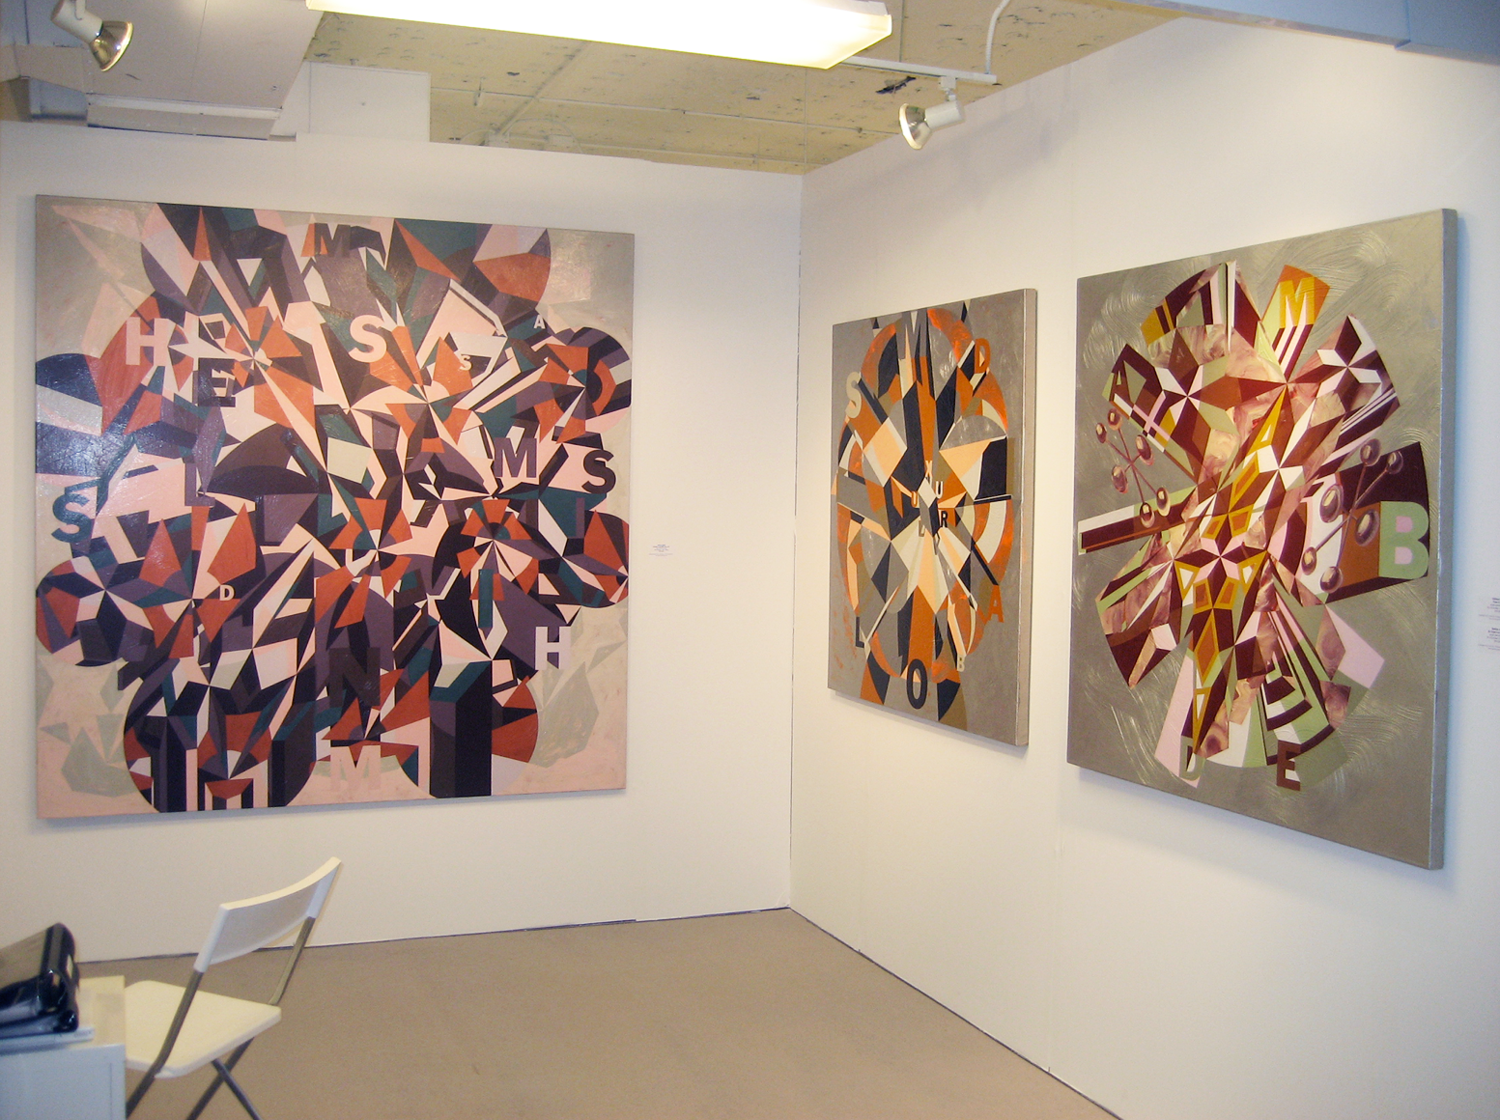  NEXT: The Invitational Exhibition of Emerging Art, Chicago, 2010 